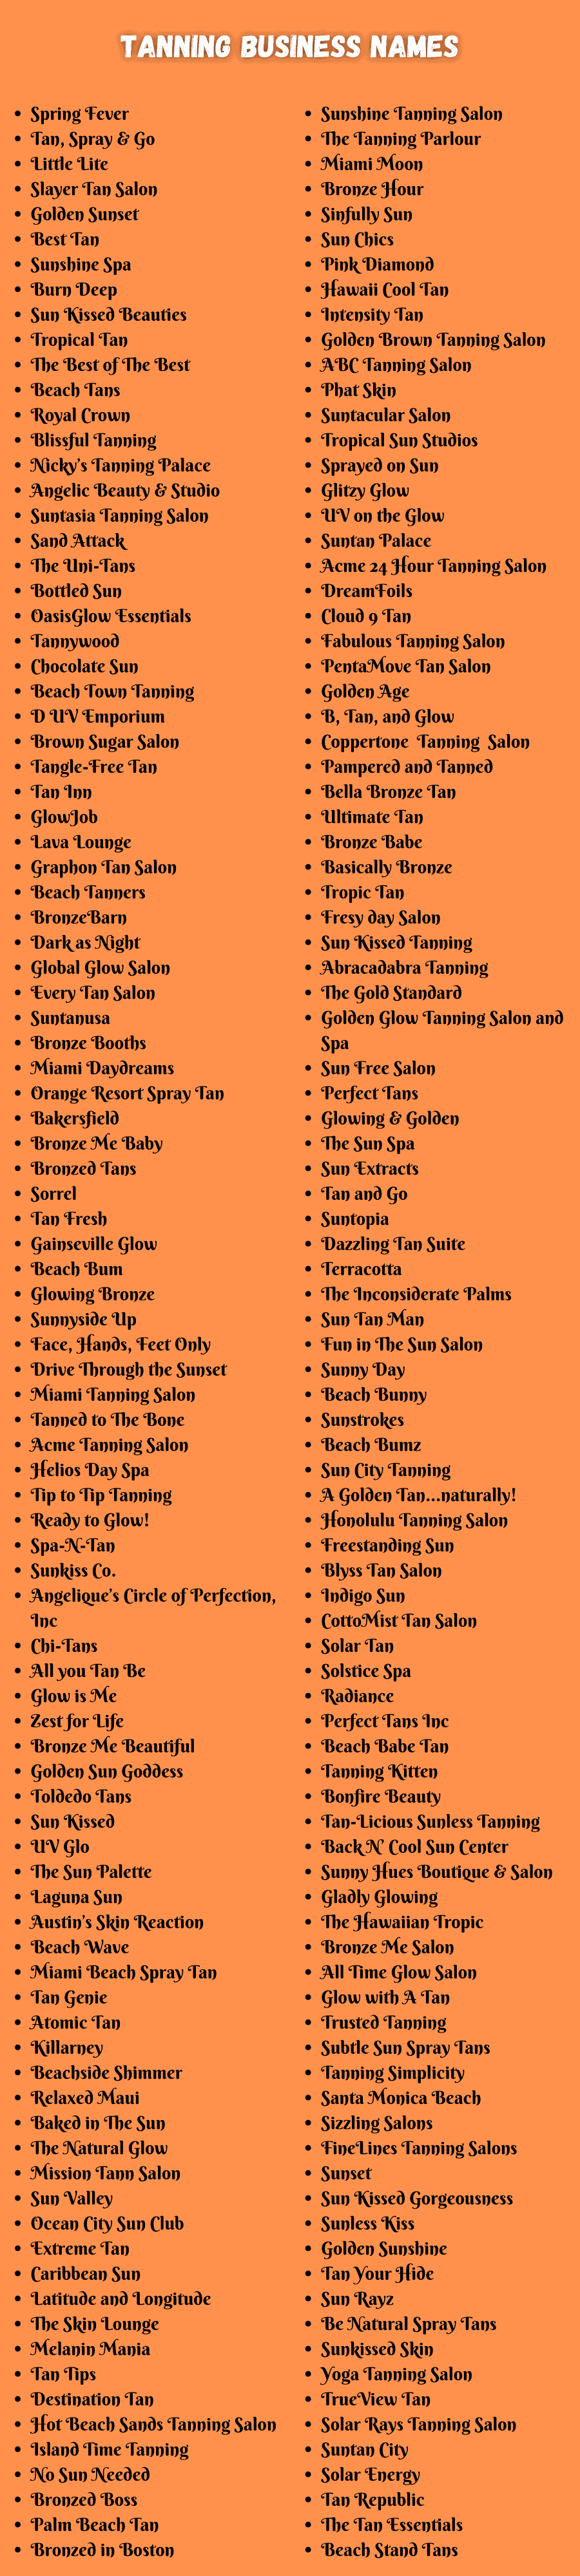 Tanning Business Names